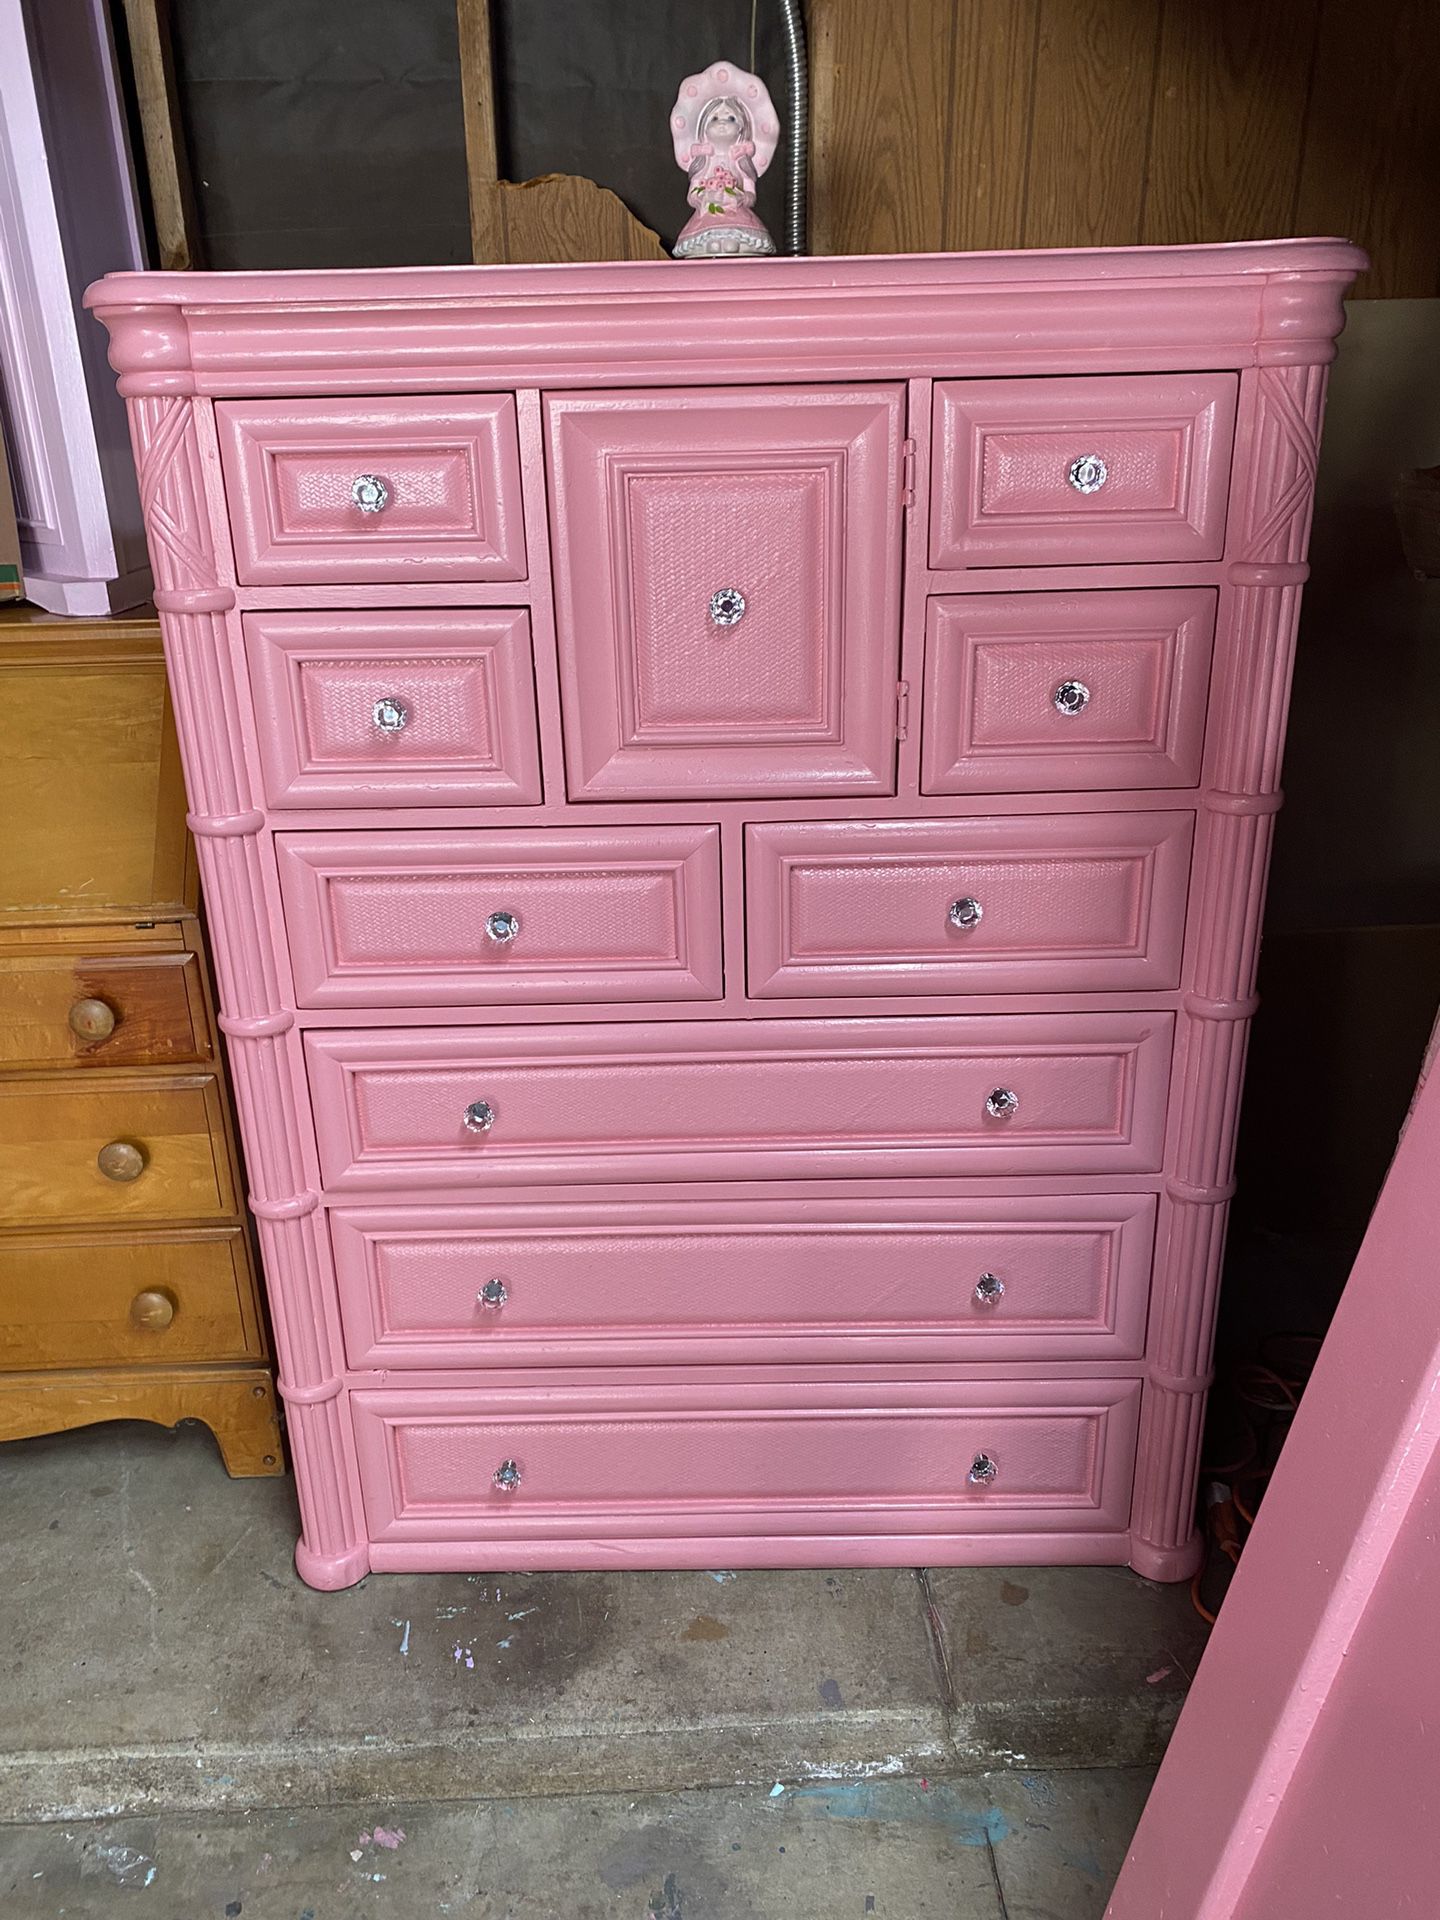 L🩷🩷K! Gorgeous Pink Armoire/Dresser with Crystal knobs